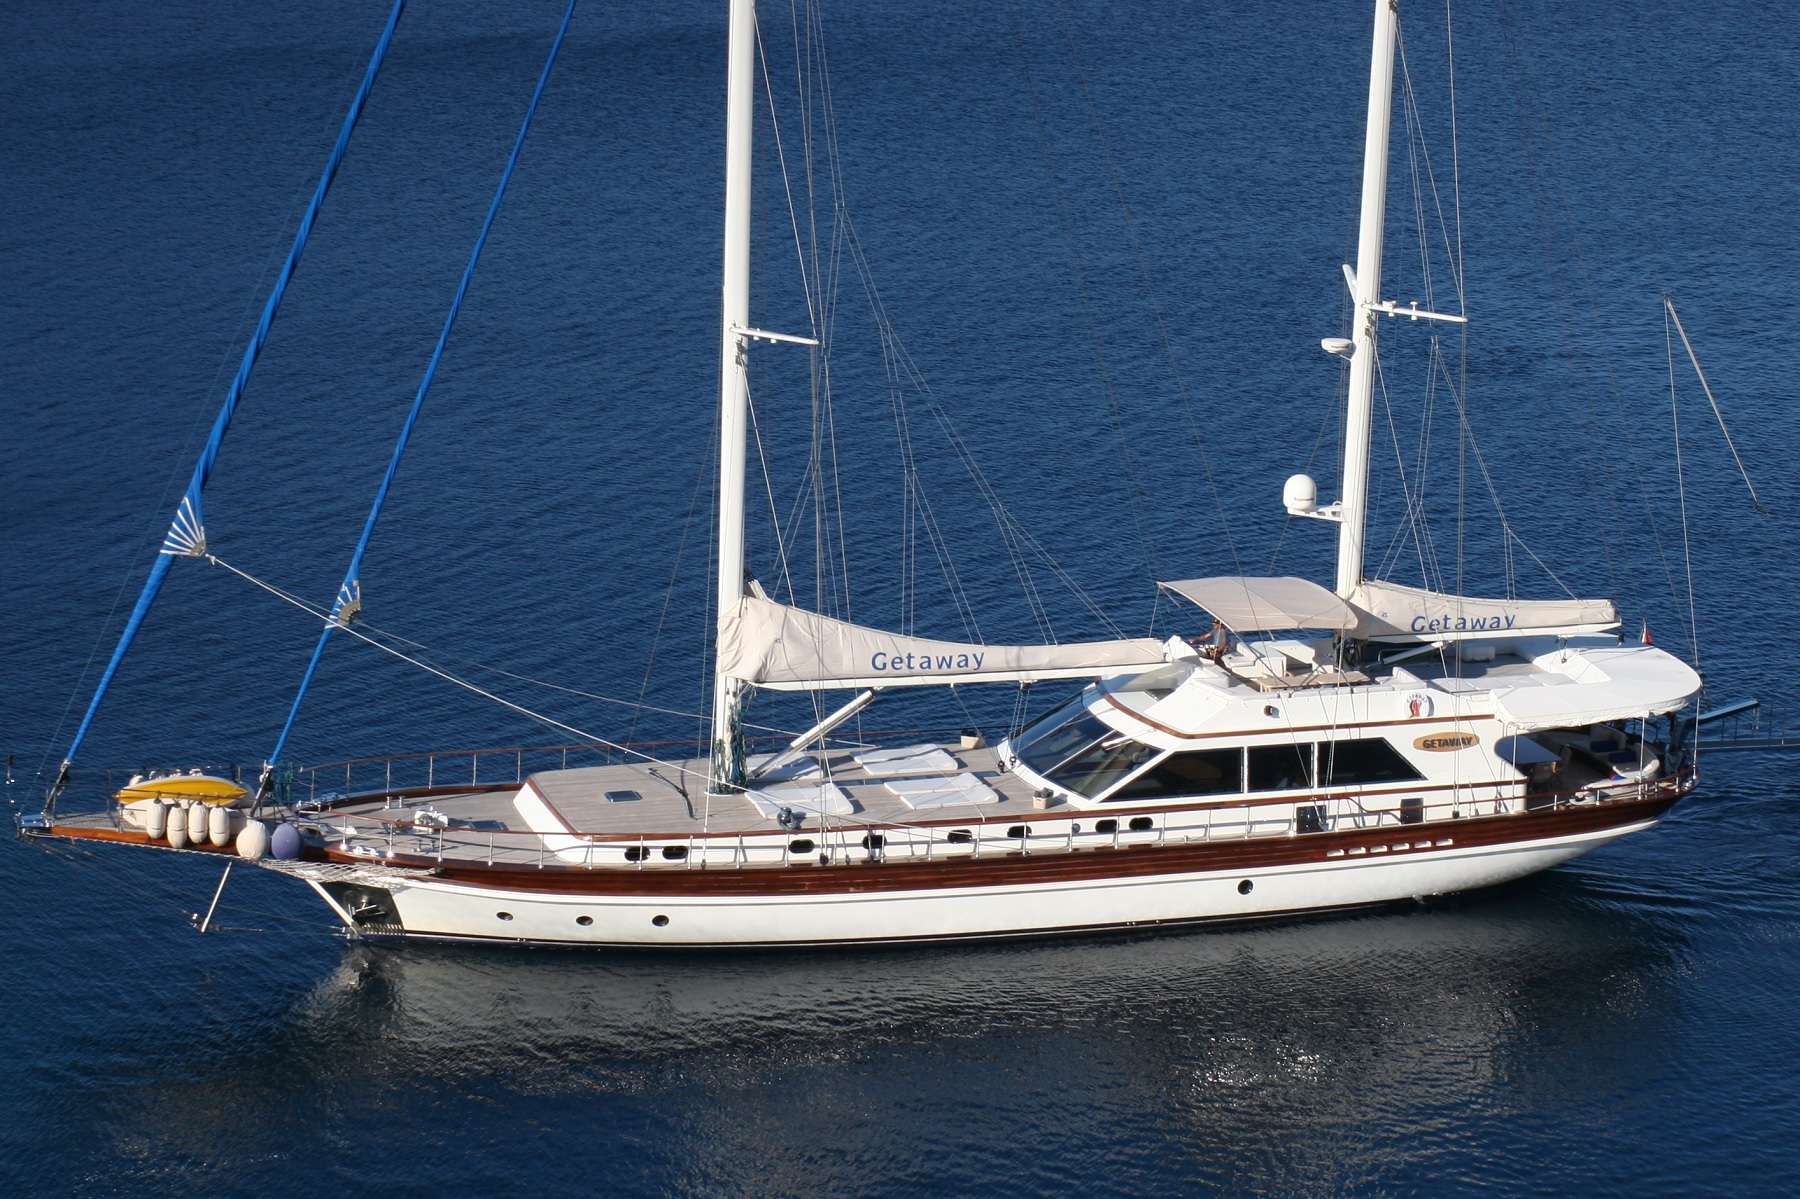 GETAWAY is one of the best sailing yachts available for charter in the Eastern Mediterranean and offers great value for money. She offers tremendous amount of exterior space as result of her wide beam, uncluttered forward deck and conveniently large flybridge. Size of the cabins equal those found on much larger yachts and consist of one very large master cabin with a California King size bed and three other double guests cabins. The flexibility to convert the two twin cabins into King bed configurations make this vessel an ideal option for four couples or families with children. Light colour interior, all around windows in the saloon and natural light from the skylight in the corridor provides a very modern airy atmosphere. Comfortable dining is possible in the aft deck, salon and flybridge. All cabins and the salon are equipped with TVs and entertainment systems but there is even a fold down TV in the aft section to allow guests to enjoy their favourite programs al-fresco. There are plenty of games and water sports available on board to be enjoyed throughout a charter. The yacht performs very well under sail, meaning her guests can not only enjoy her modern comforts but also the wonderful feeling of gliding through the turquoise waters of the Med.